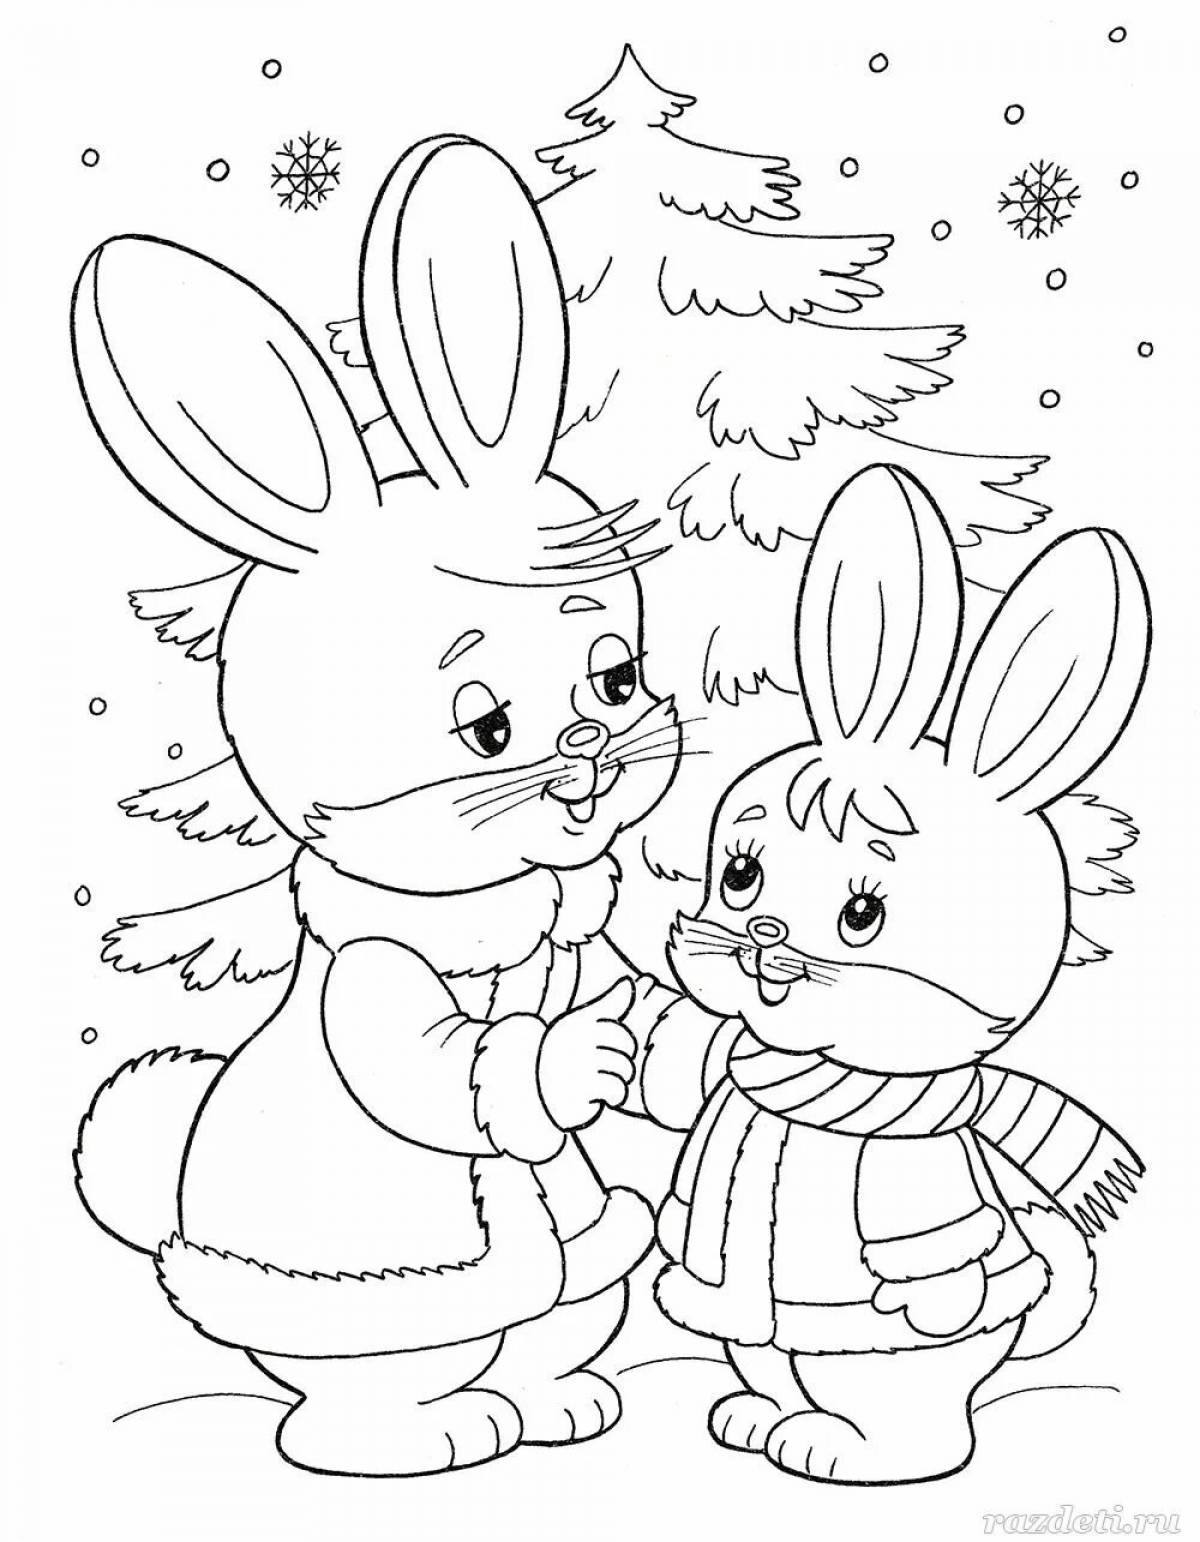 Coloring pages Christmas bunny obsessed with flowers